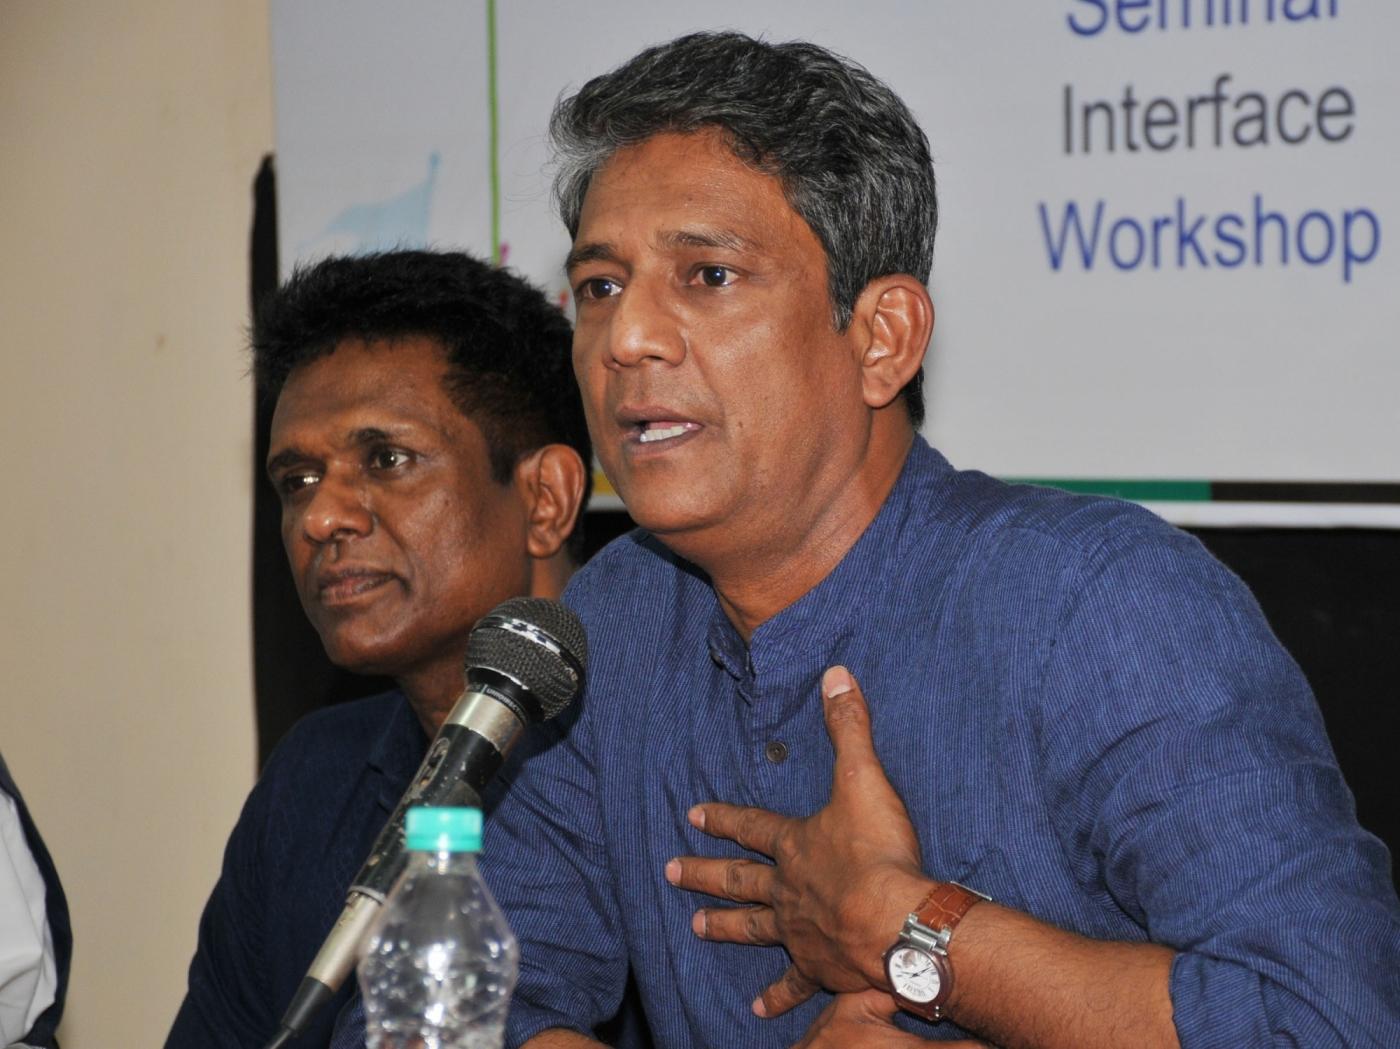 Guwahati: Actor Adil Hussain addresses during a masterclass during the 8th Theatre Olympics at Srimanta Sankardev Kalakshetra in Guwahati on March 17, 2018. (Photo: IANS) by .